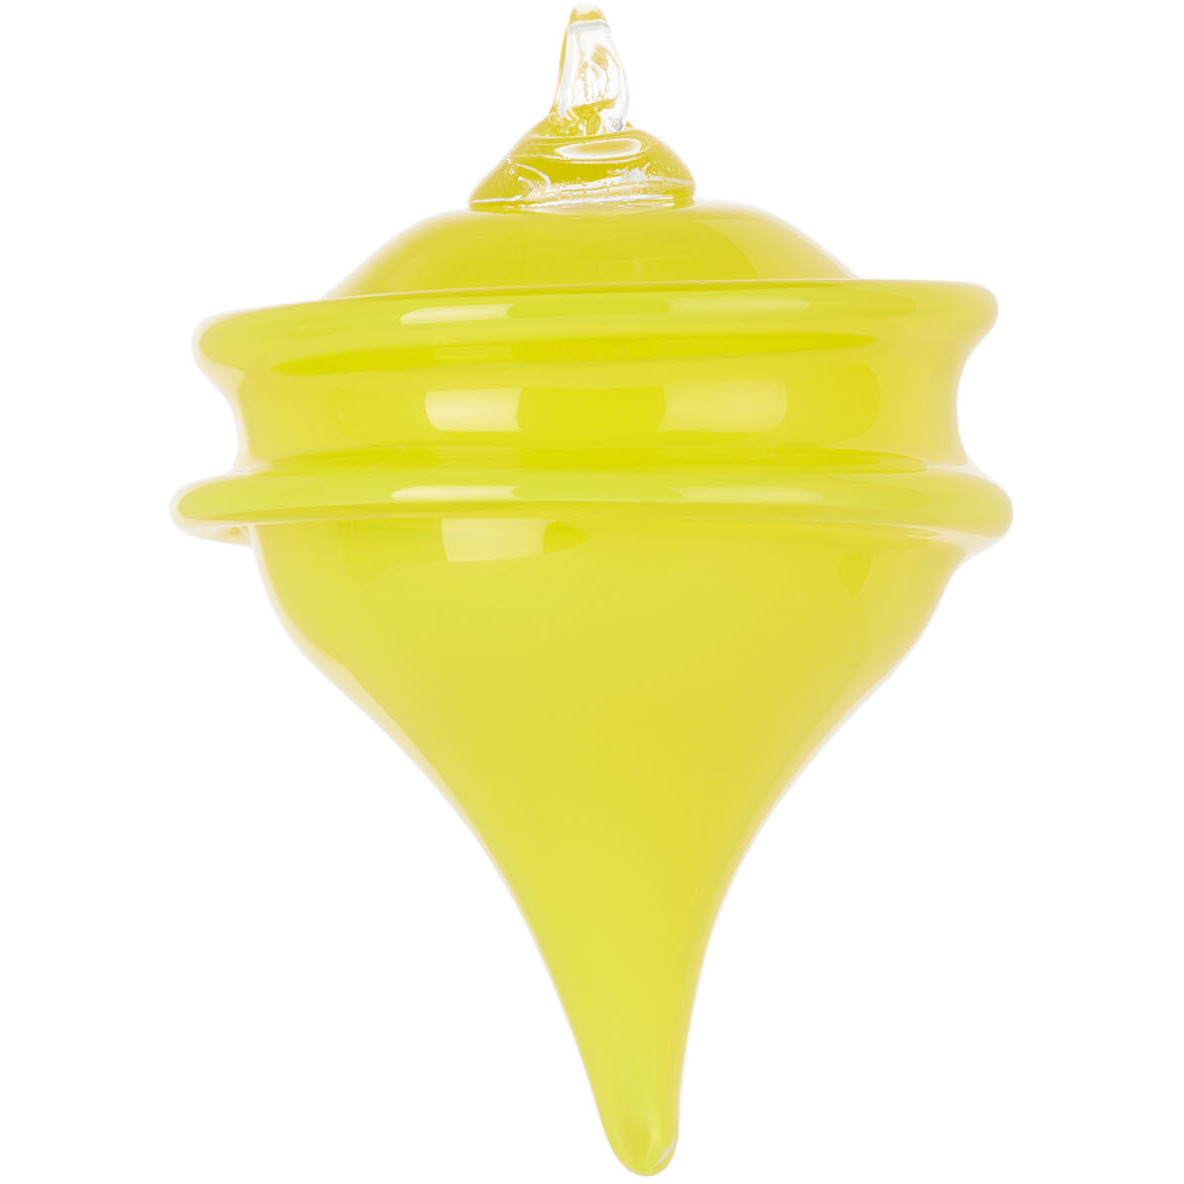 Sticky Glass Yellow Deflated Ornament - image 1